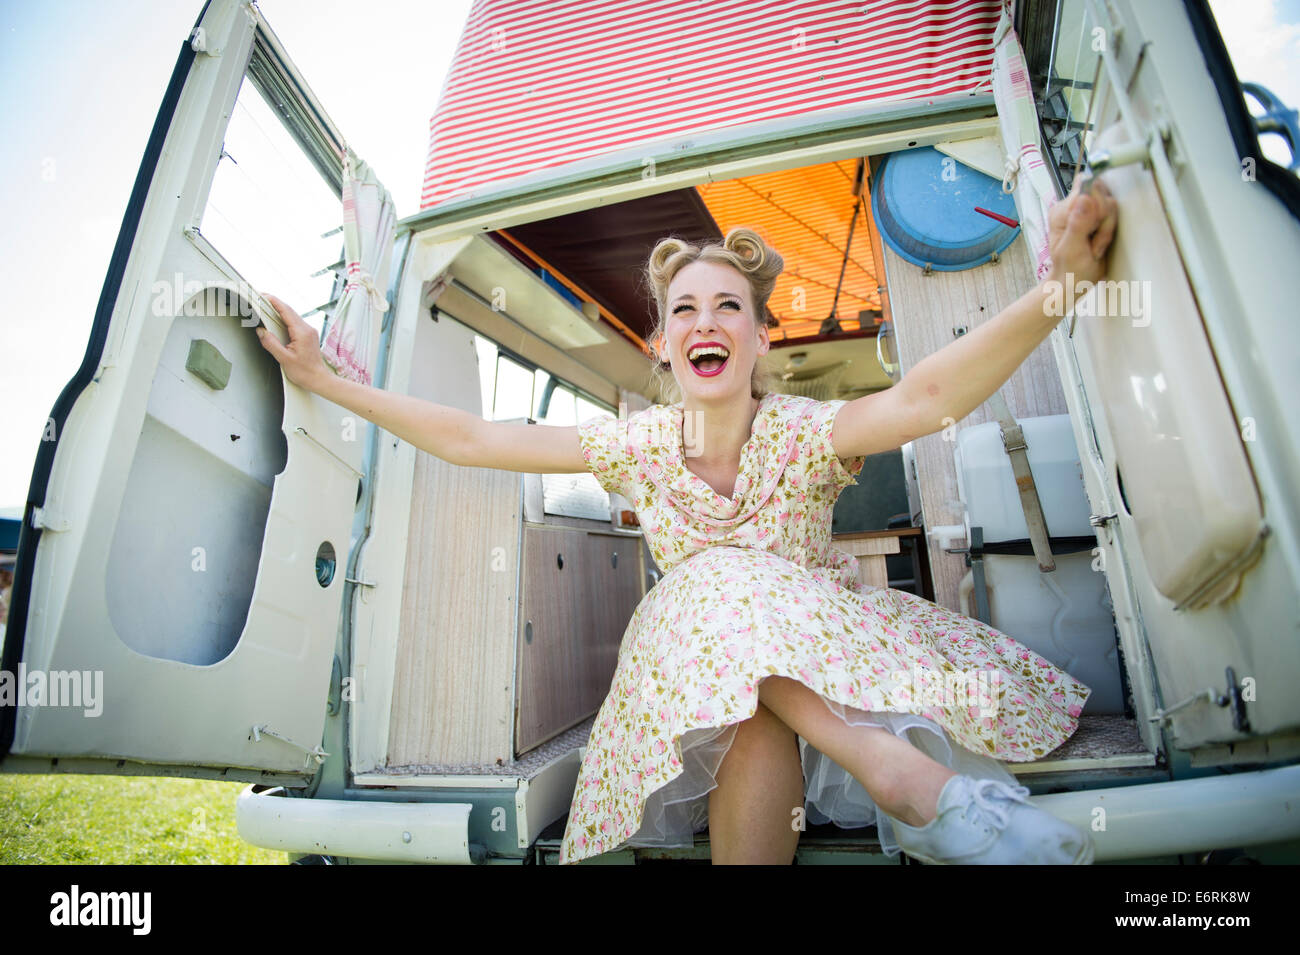 A woman dressed in retro 50's American housewife style summer dress frock sitting posing in a classic period camper van UK Stock Photo